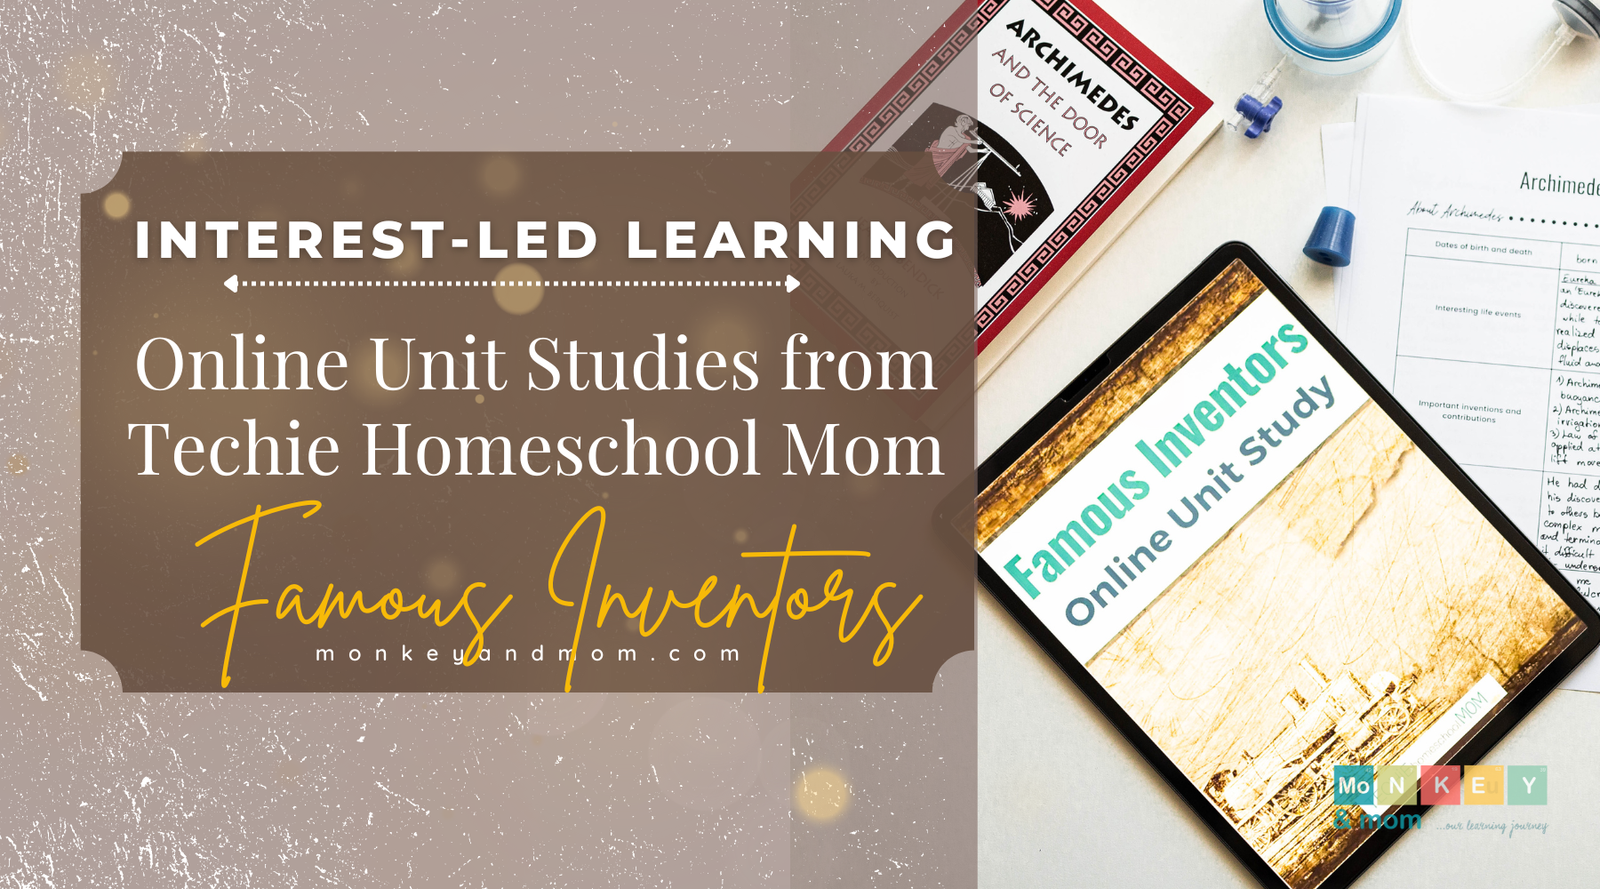 Boost Your Learning with the Online Unit Studies from Techie Homeschool Mom